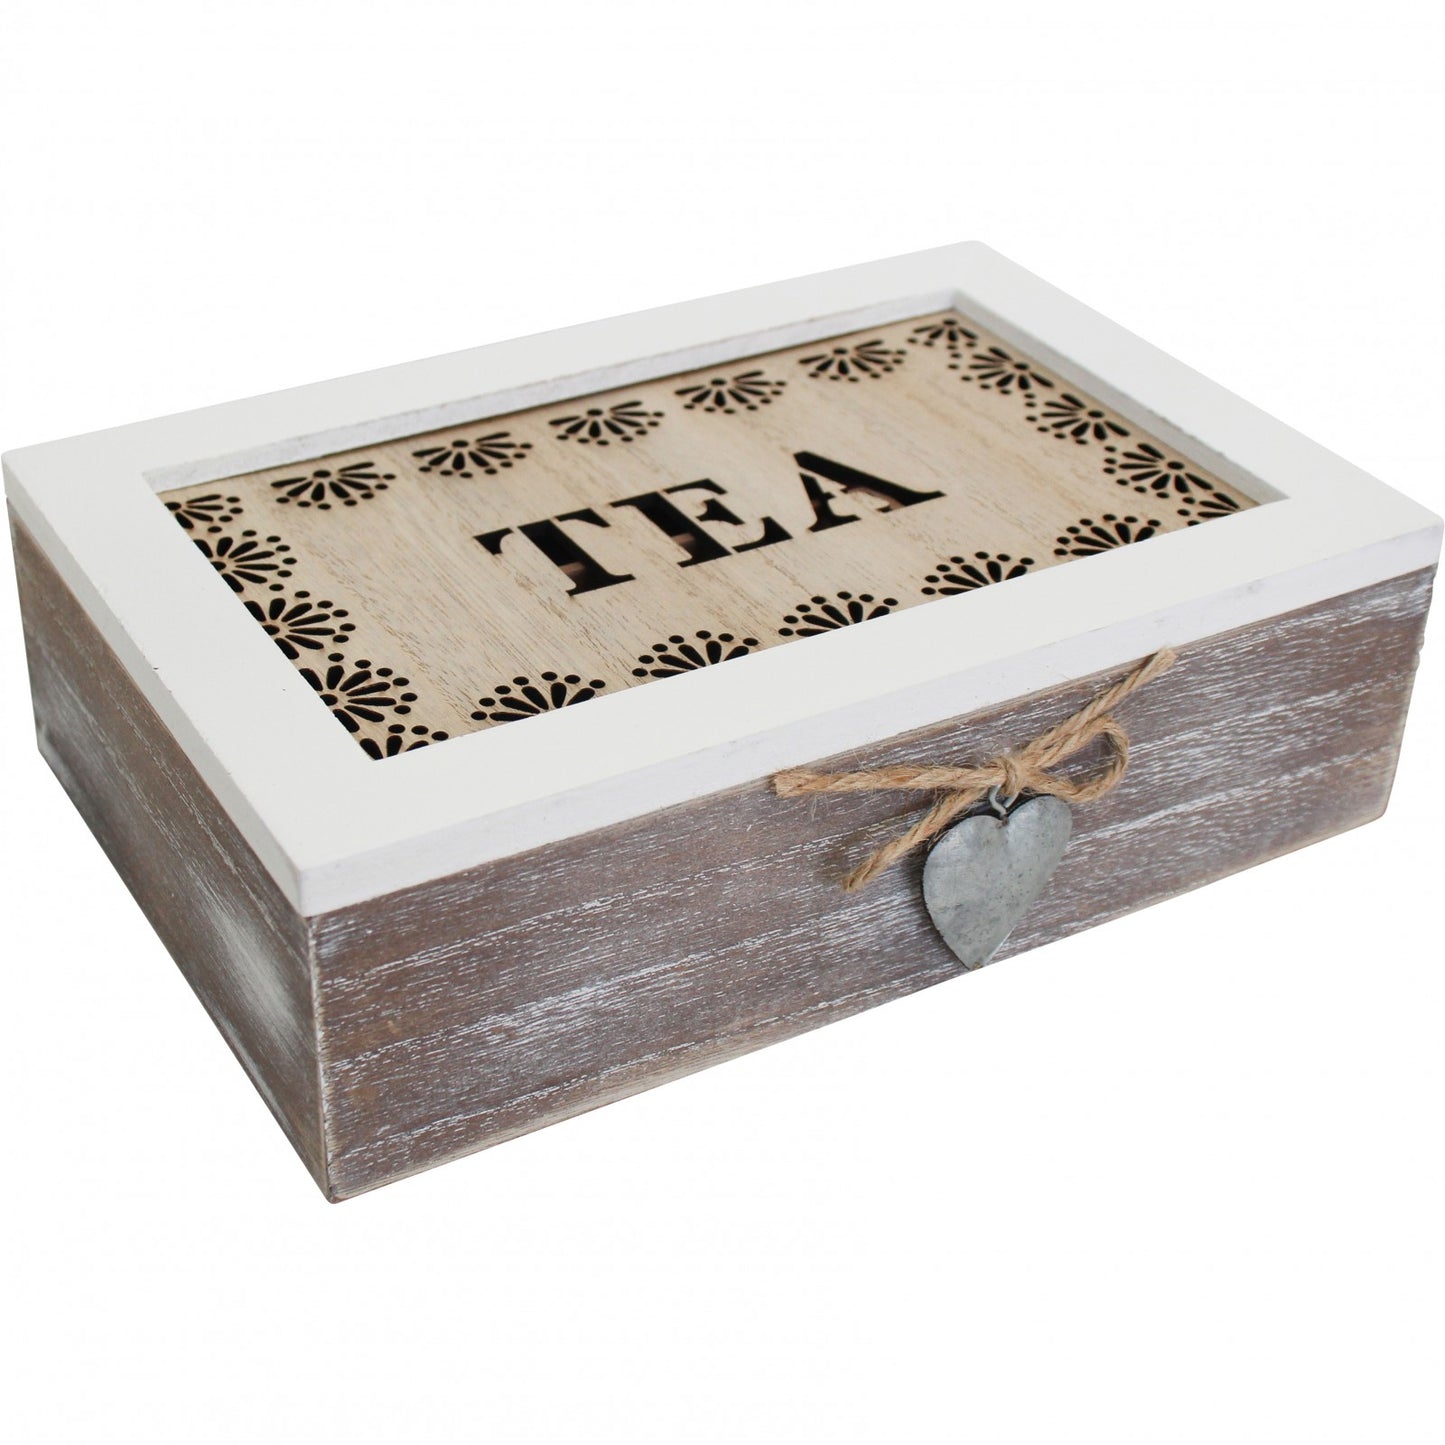 Tea Box French Love - The Renmy Store Homewares & Gifts 